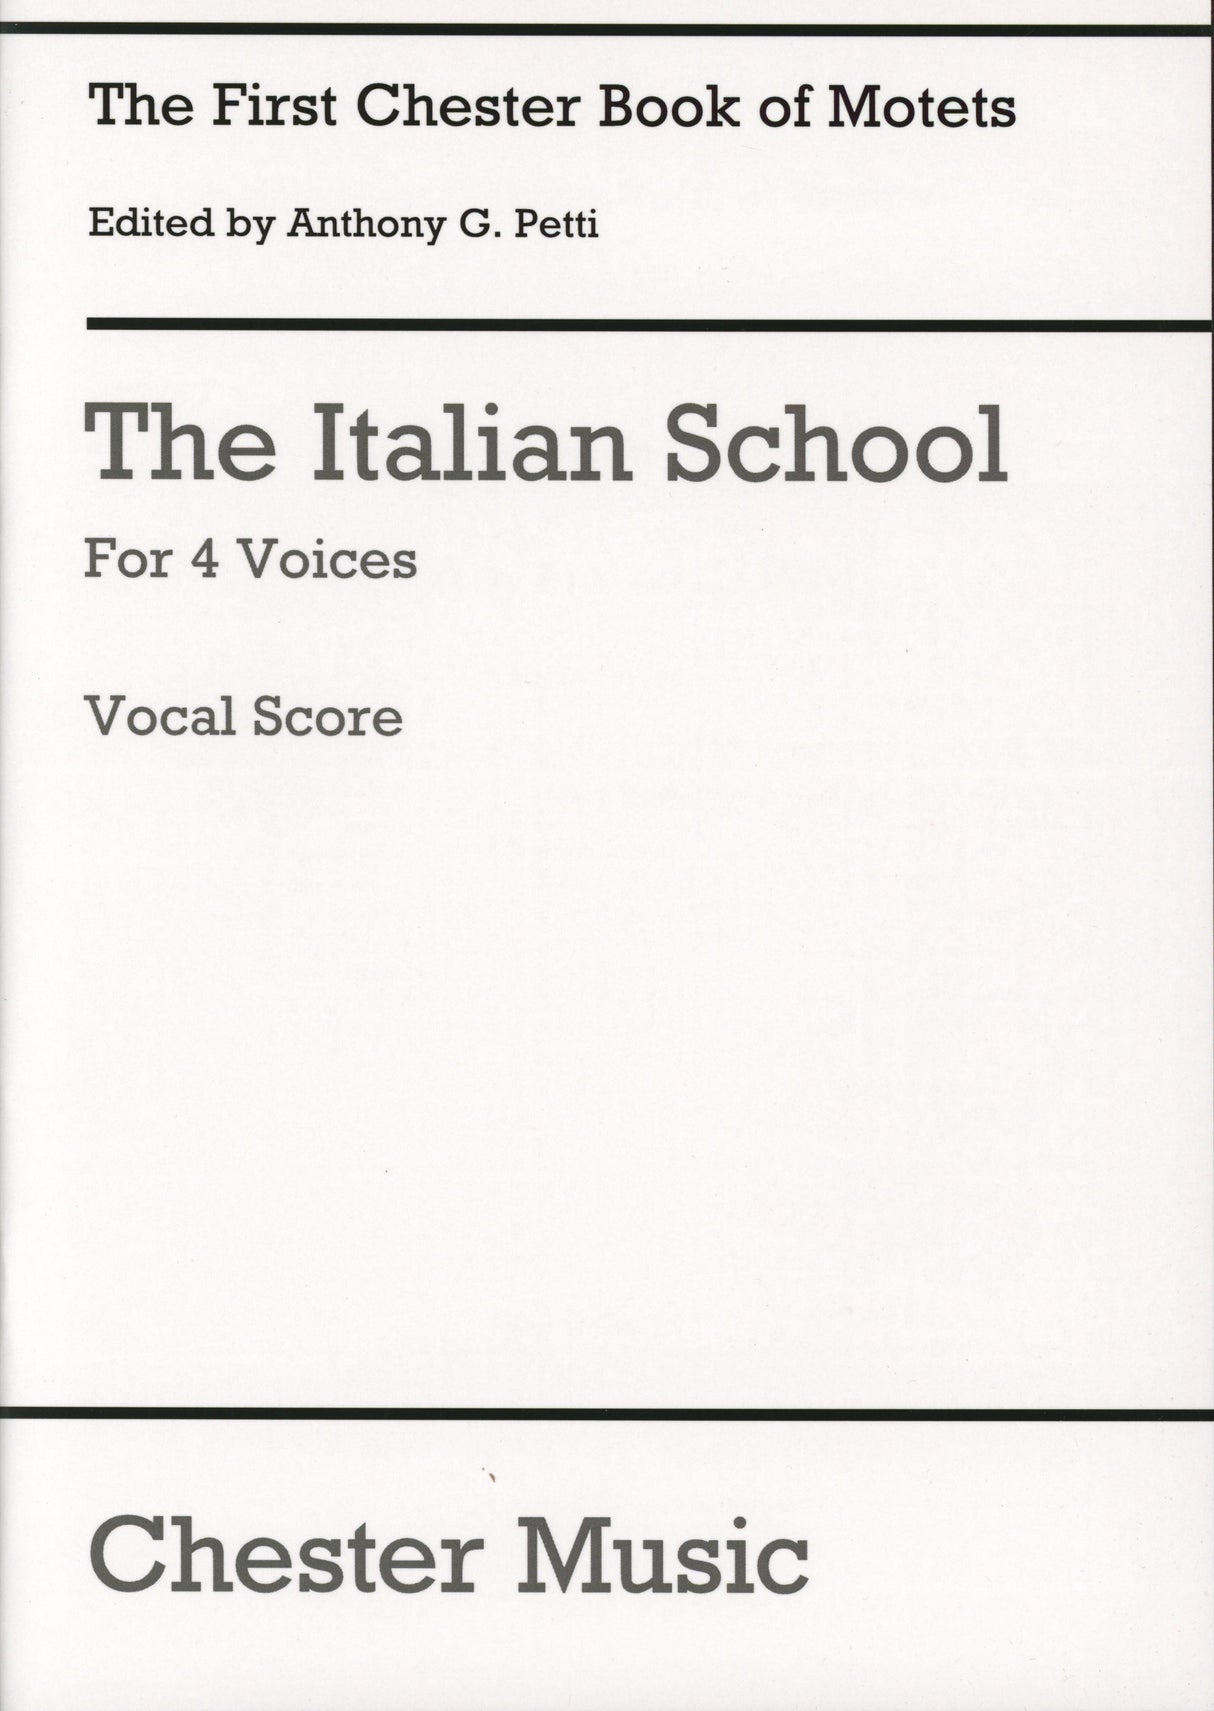 The Chester Book of Motets - Volume 1 (The Italian School for 4 Voices)